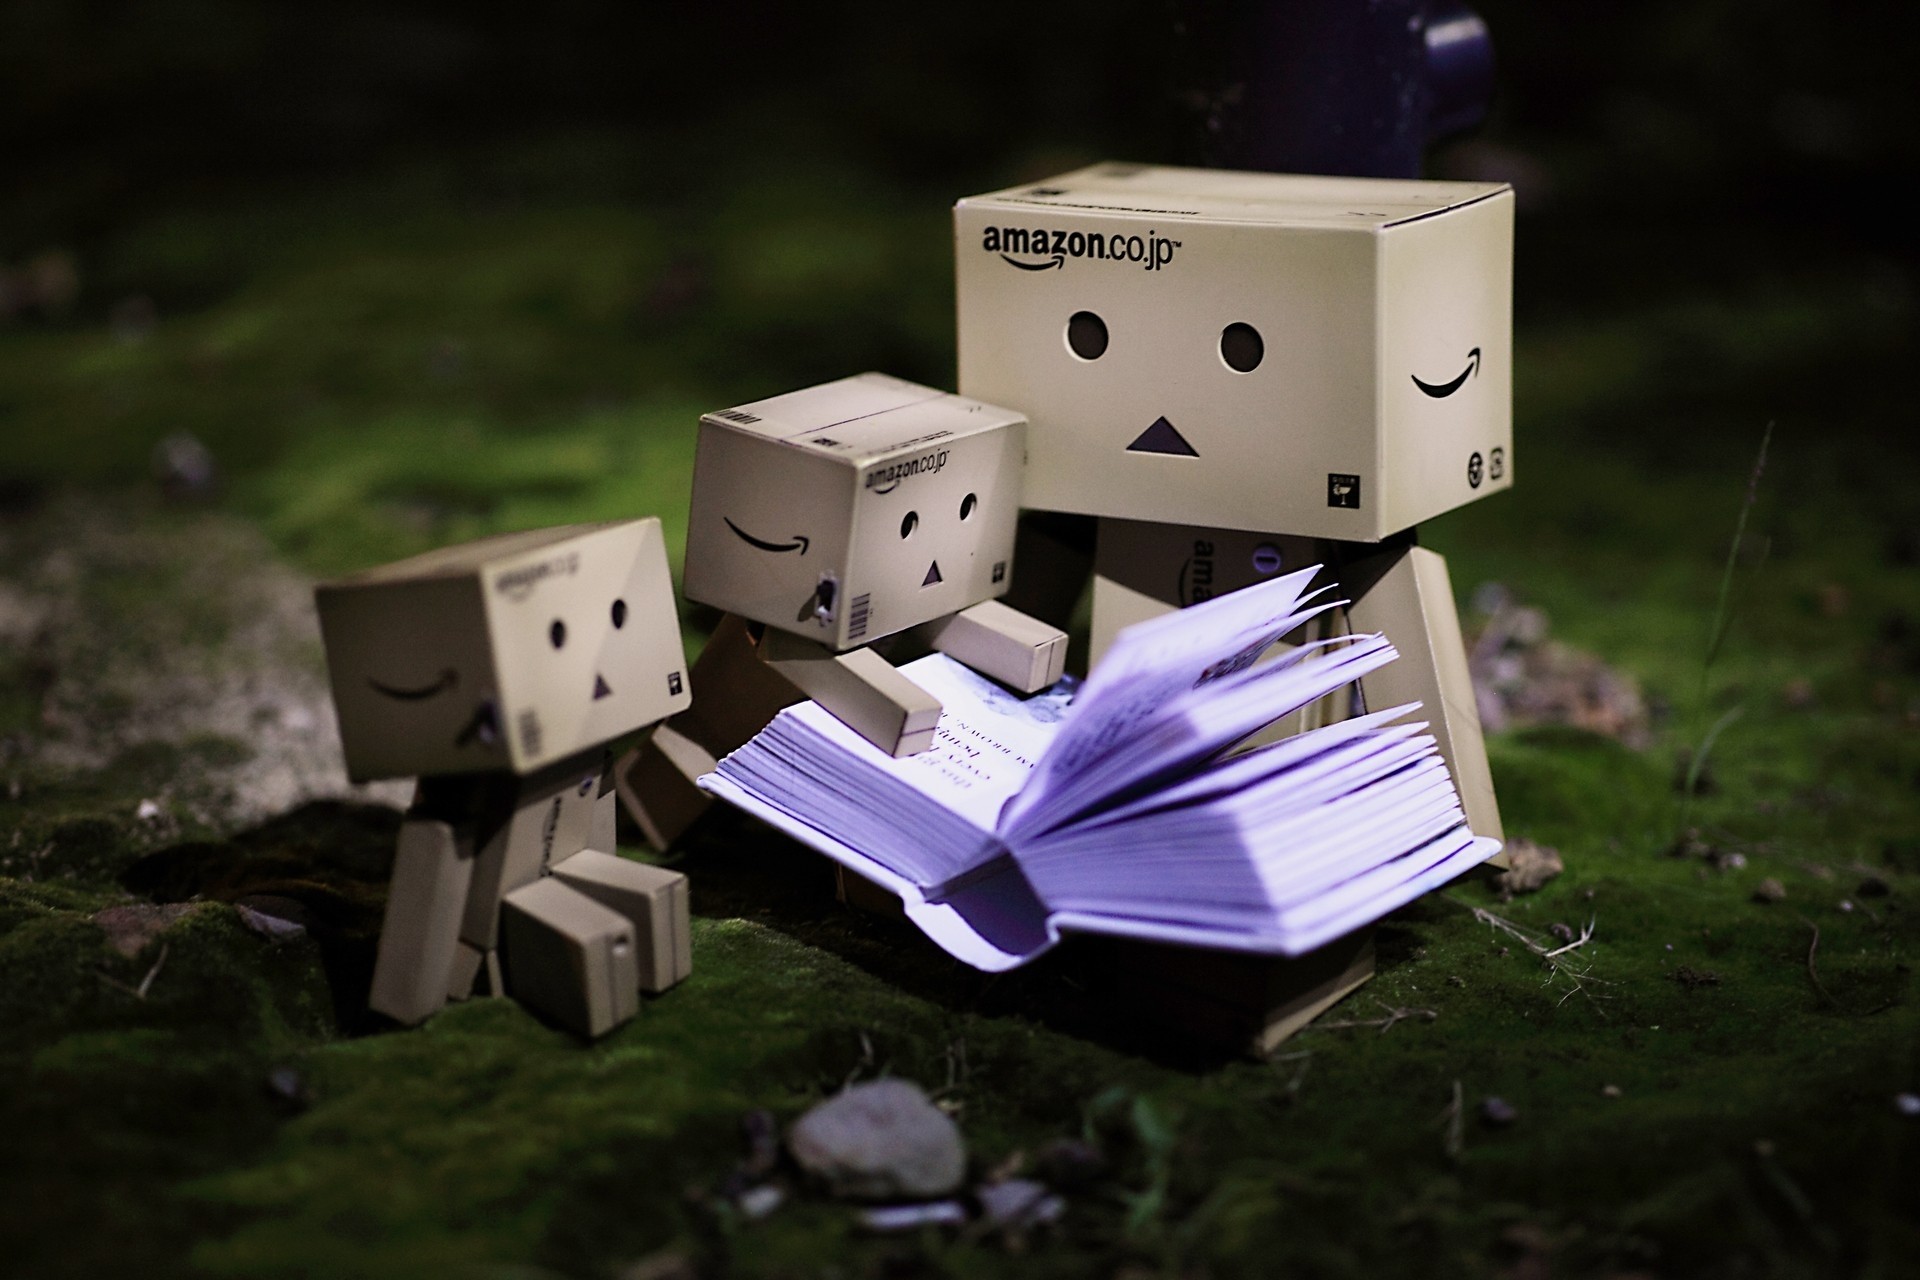 149064 download wallpaper book, miscellanea, miscellaneous, danbo, cardboard robot, small, reading screensavers and pictures for free